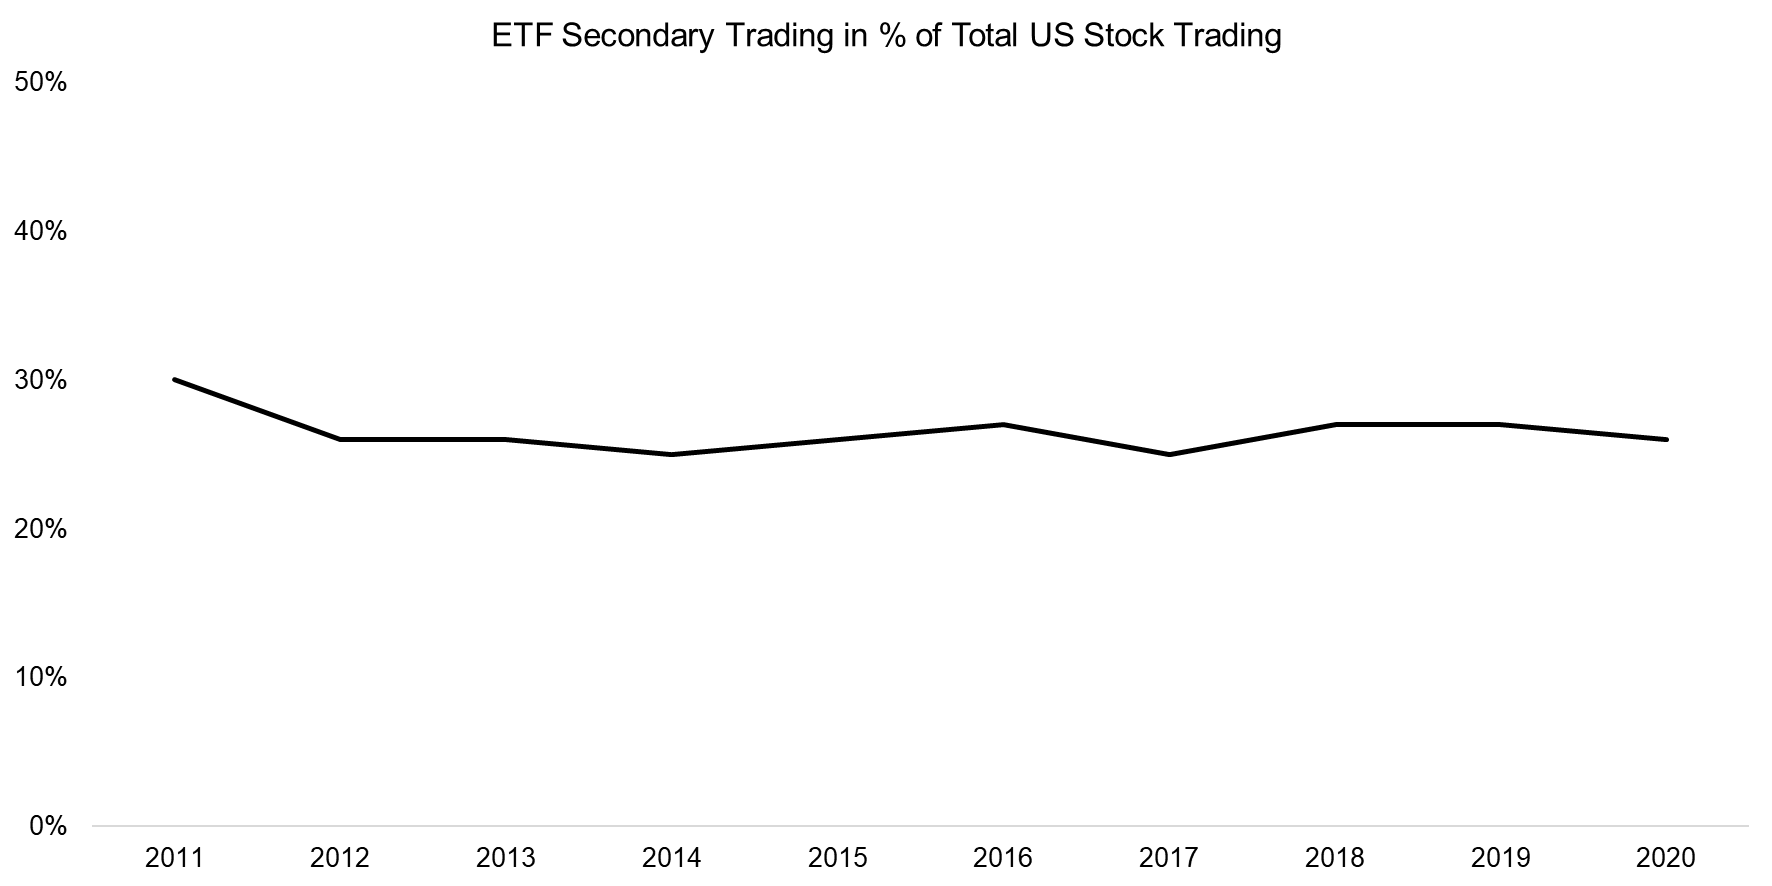 ETF Secondary Trading in % of Total US Stock Trading